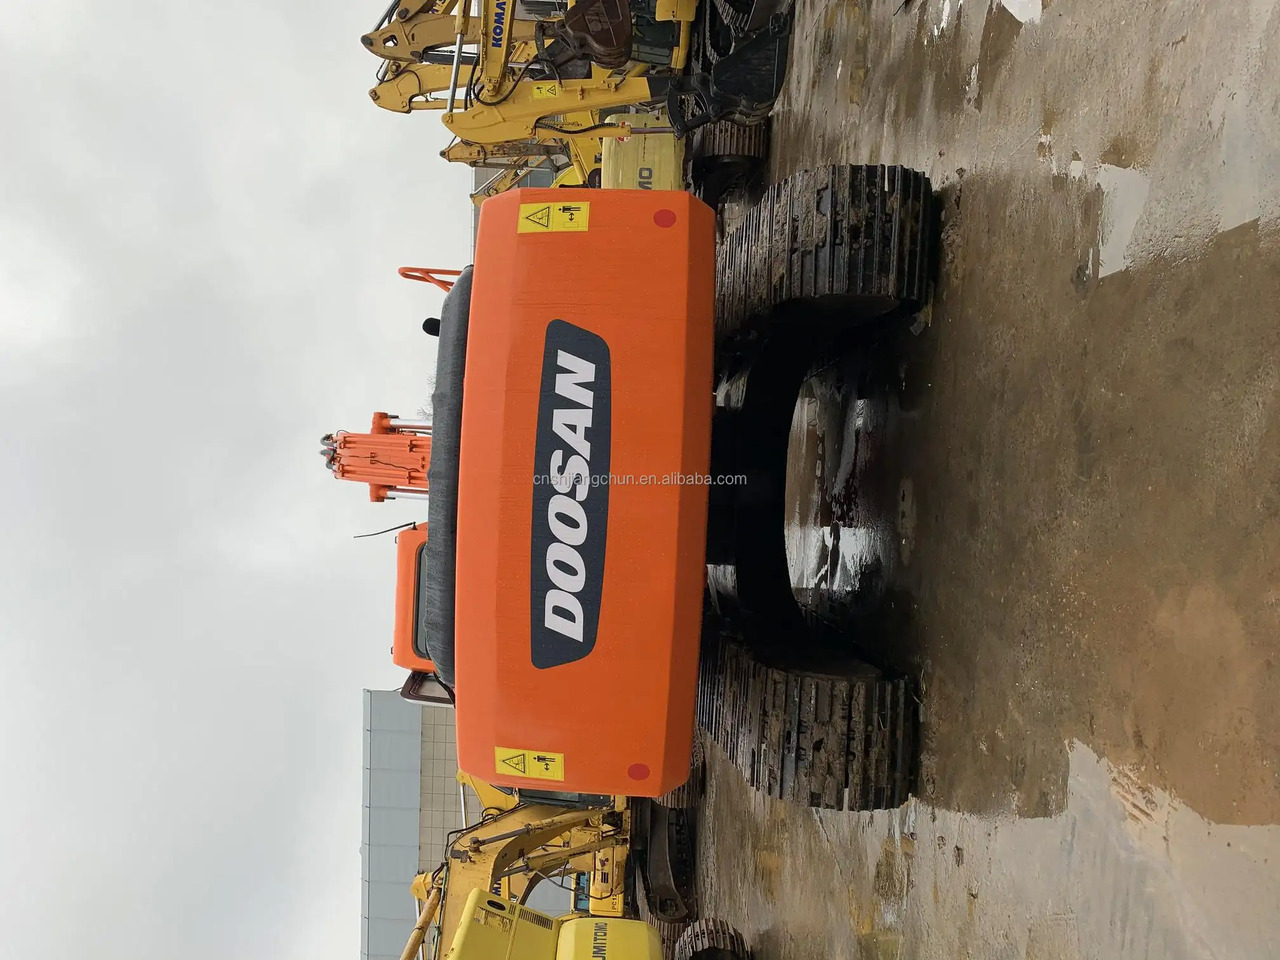 Pelle sur chenille Top Quality Doosan 220 Crawler Excavator For Sale DH Used 22 ton LC-7 With Low Hours original second hand: photos 6